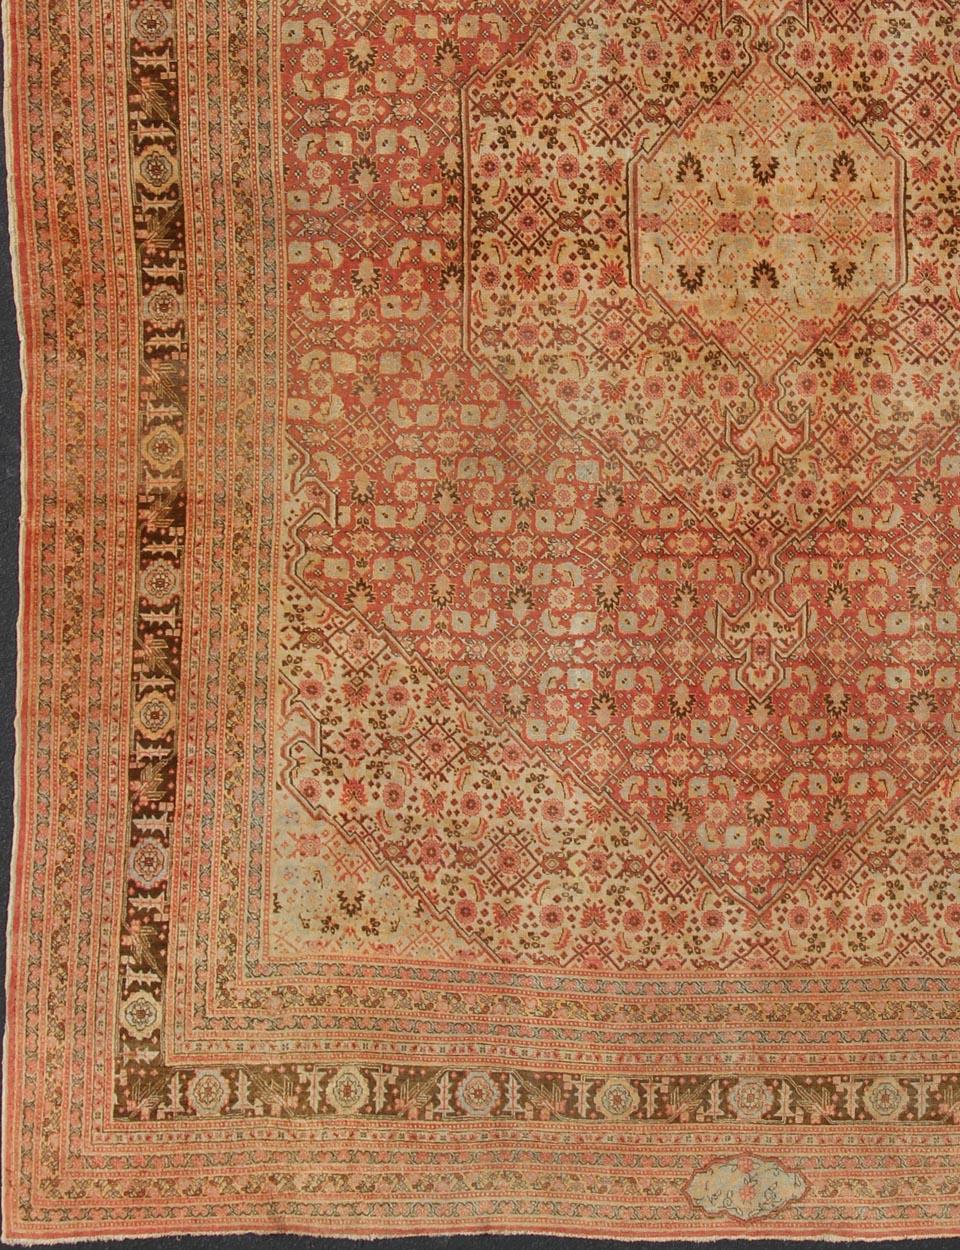 Tabriz antique rug from Persia with all-over design and medallion in multi-colors. Keivan Woven Arts / rug  / 19-0216, country of origin / type: Iran / Tabriz, circa 1900. Antique Persian Tabriz rug with medallion design in coral, cream and brown